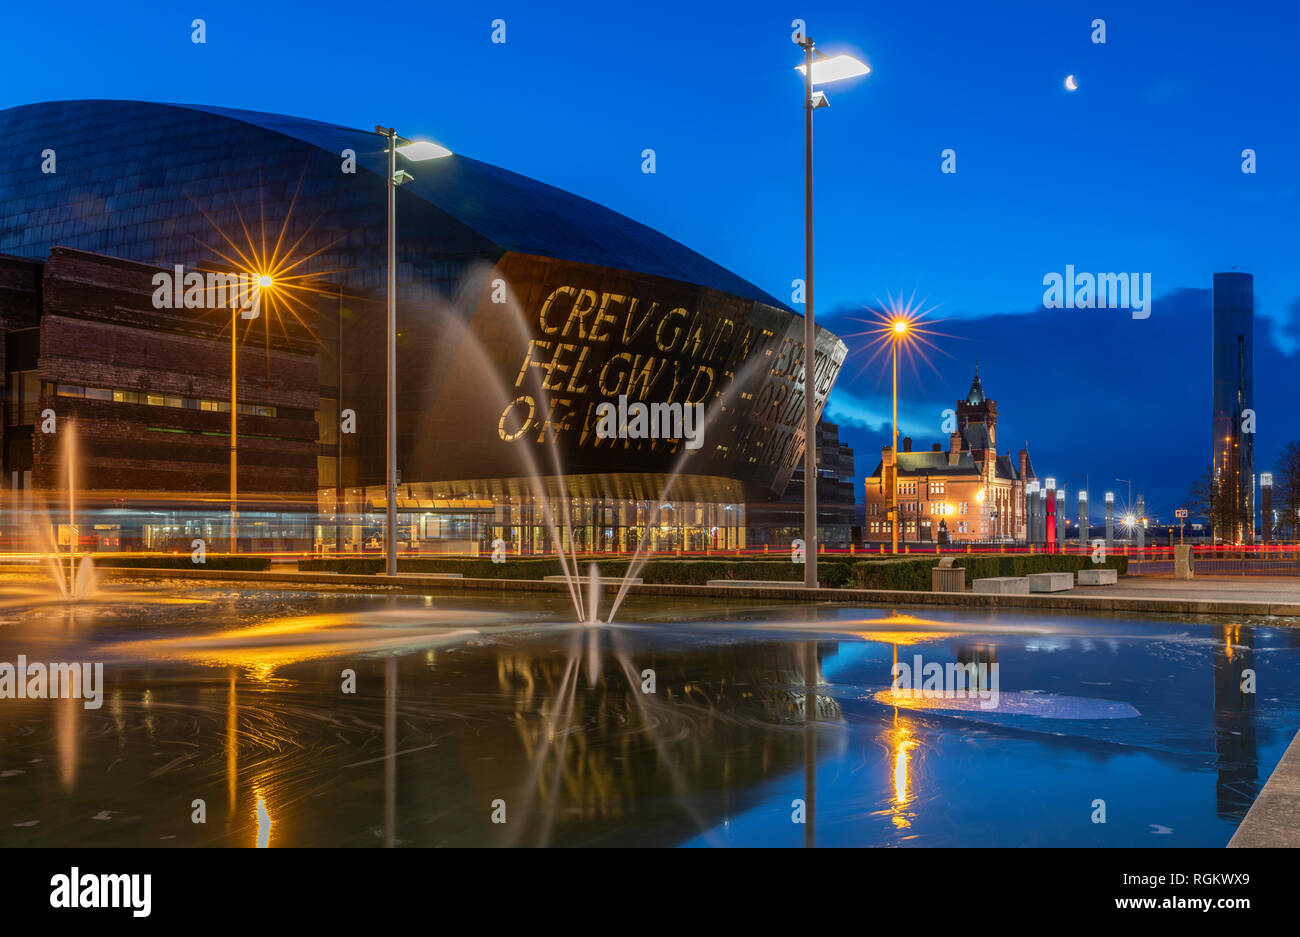 The Wales Millennium Centre, Pierhead Building, Water Tower and the Flourish Fountain, Cardiff Bay, Wales Stock Photo